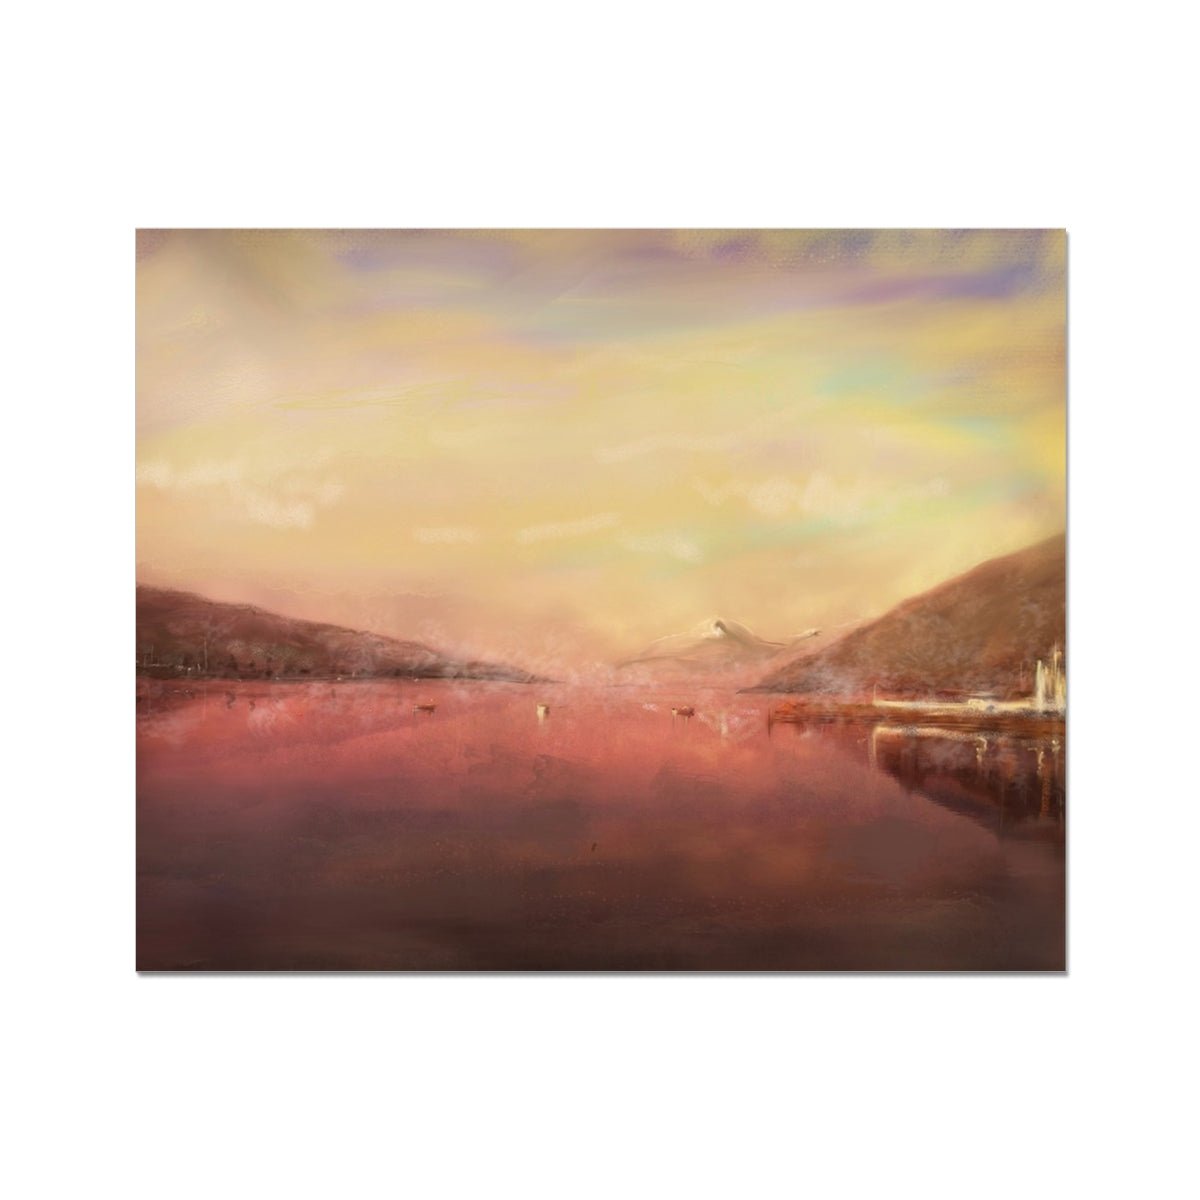 Loch Tay Painting | Artist Proof Collector Prints From Scotland-Artist Proof Collector Prints-Scottish Lochs & Mountains Art Gallery-20"x16"-Paintings, Prints, Homeware, Art Gifts From Scotland By Scottish Artist Kevin Hunter